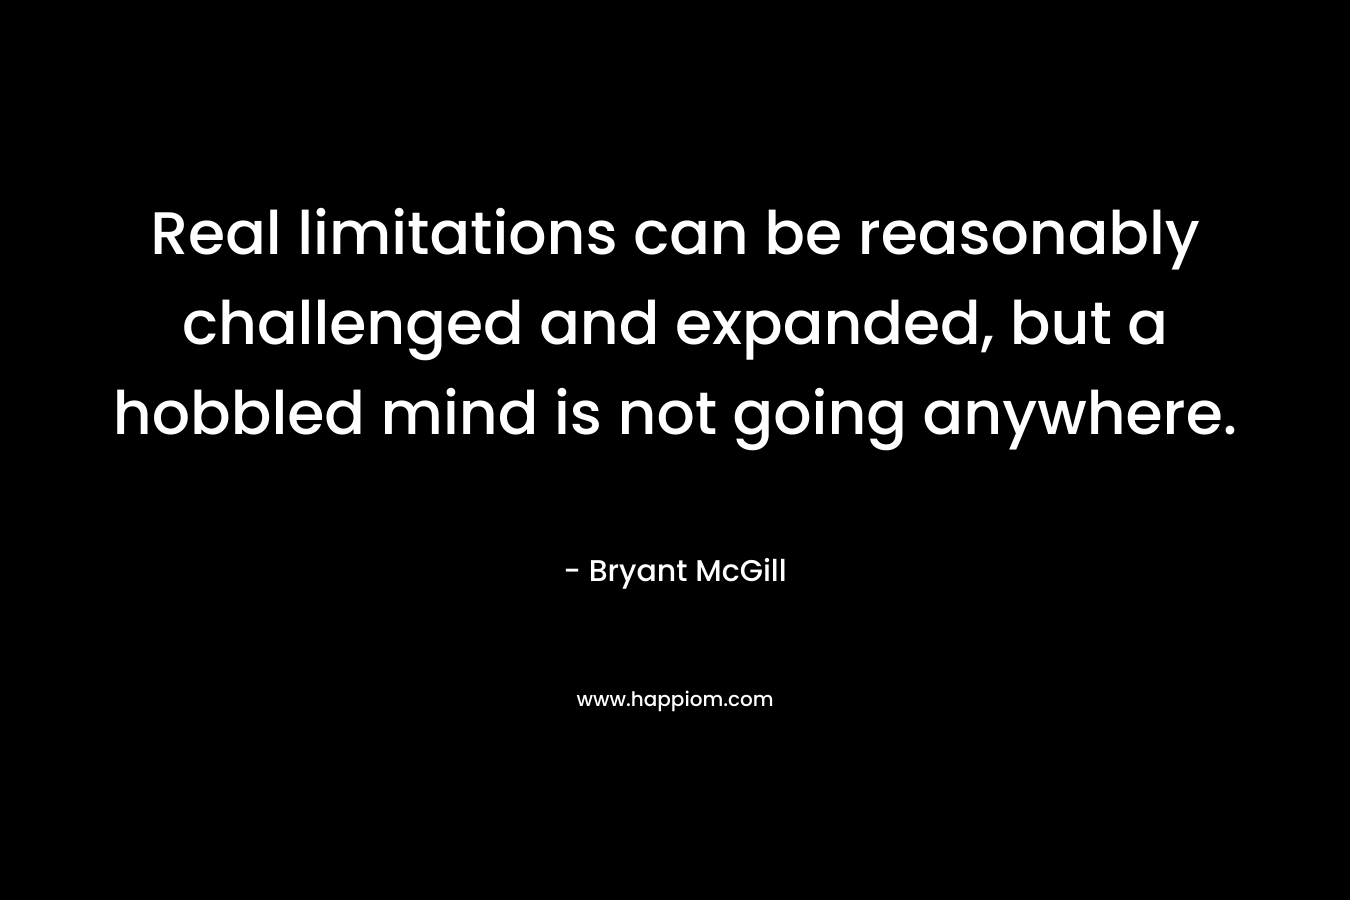 Real limitations can be reasonably challenged and expanded, but a hobbled mind is not going anywhere. – Bryant McGill